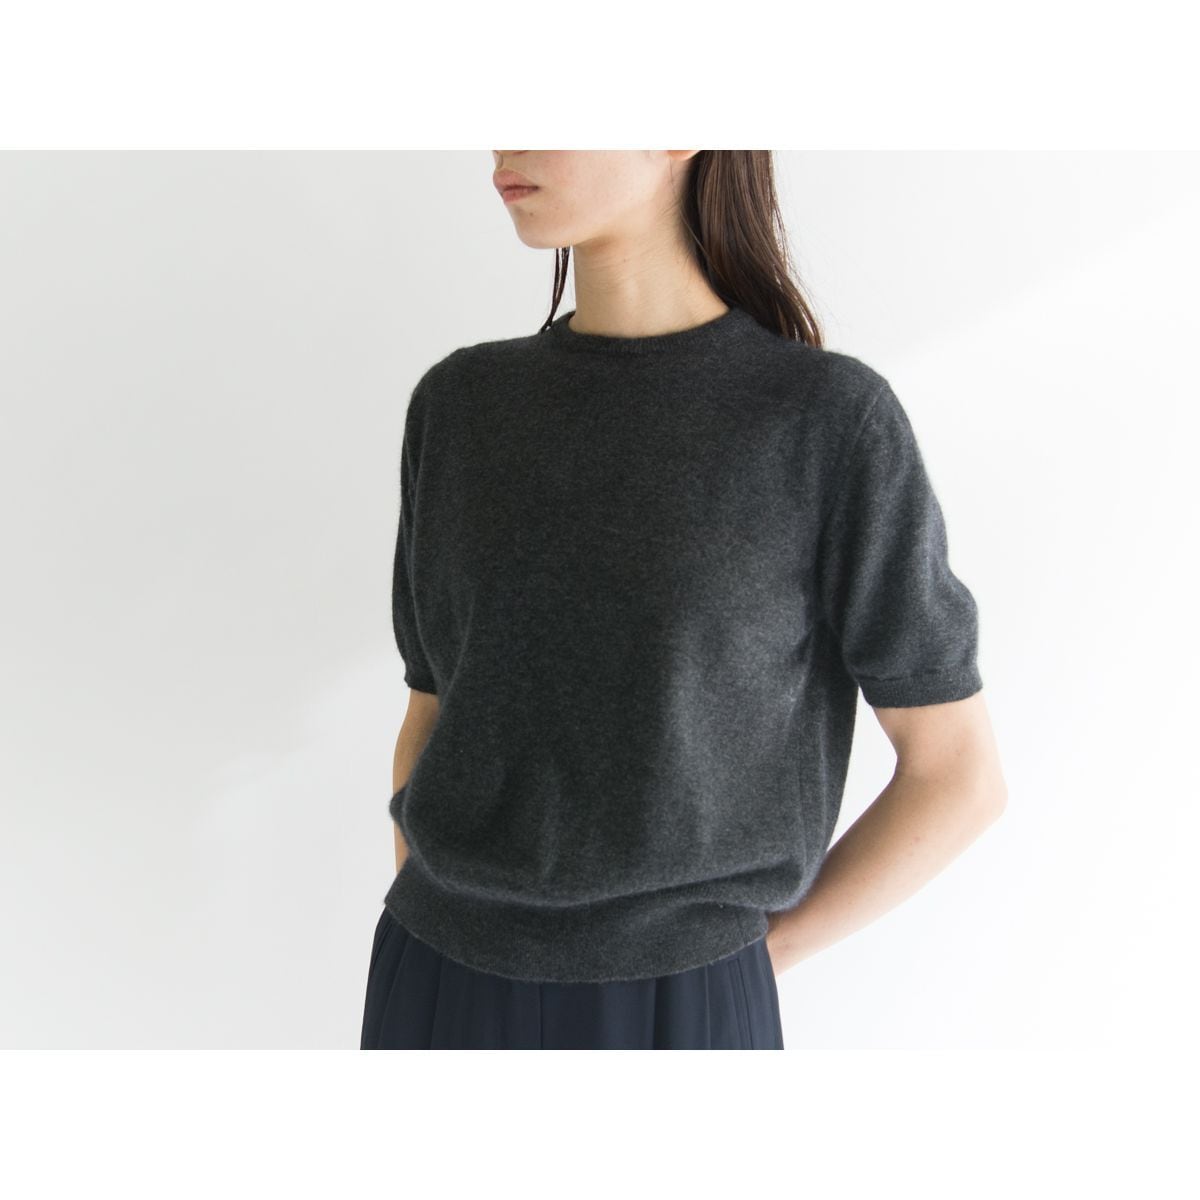 【Alpinistan】Made in Italy H/S wool sweater（イタリア製 半袖 ウール セーター）11b